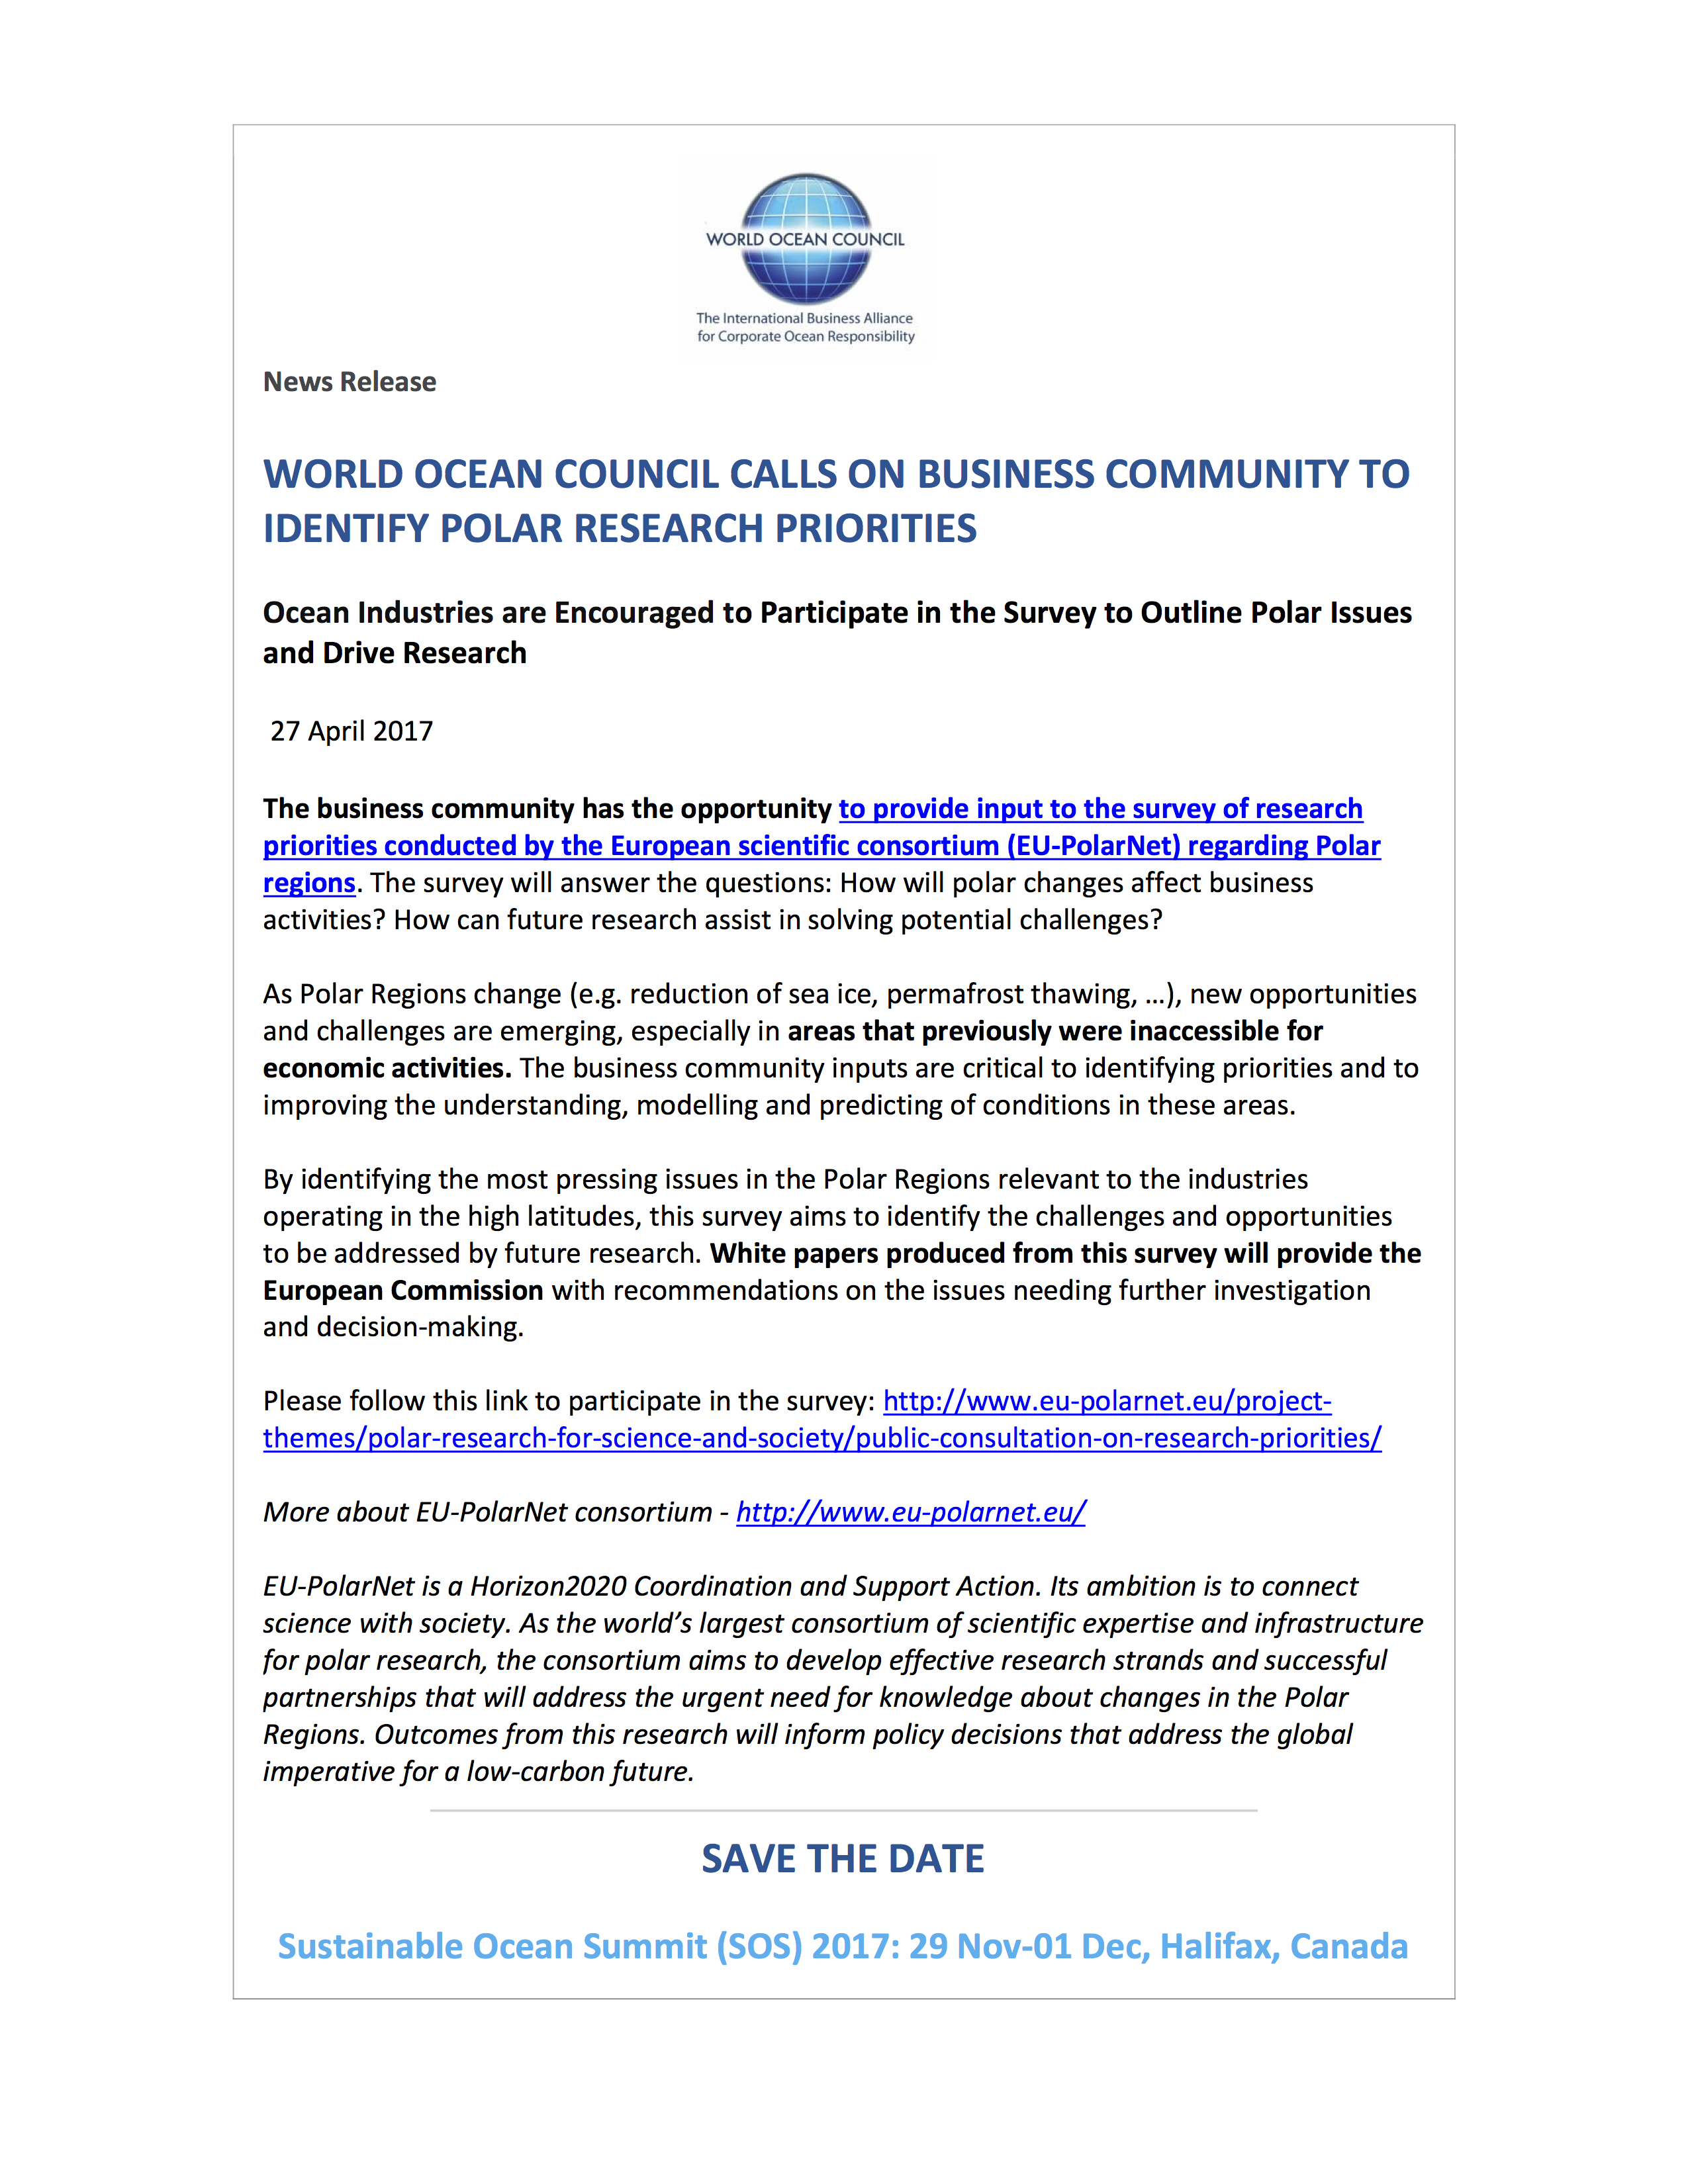 WOC News Release Industry Input Polar on Research Priorities 